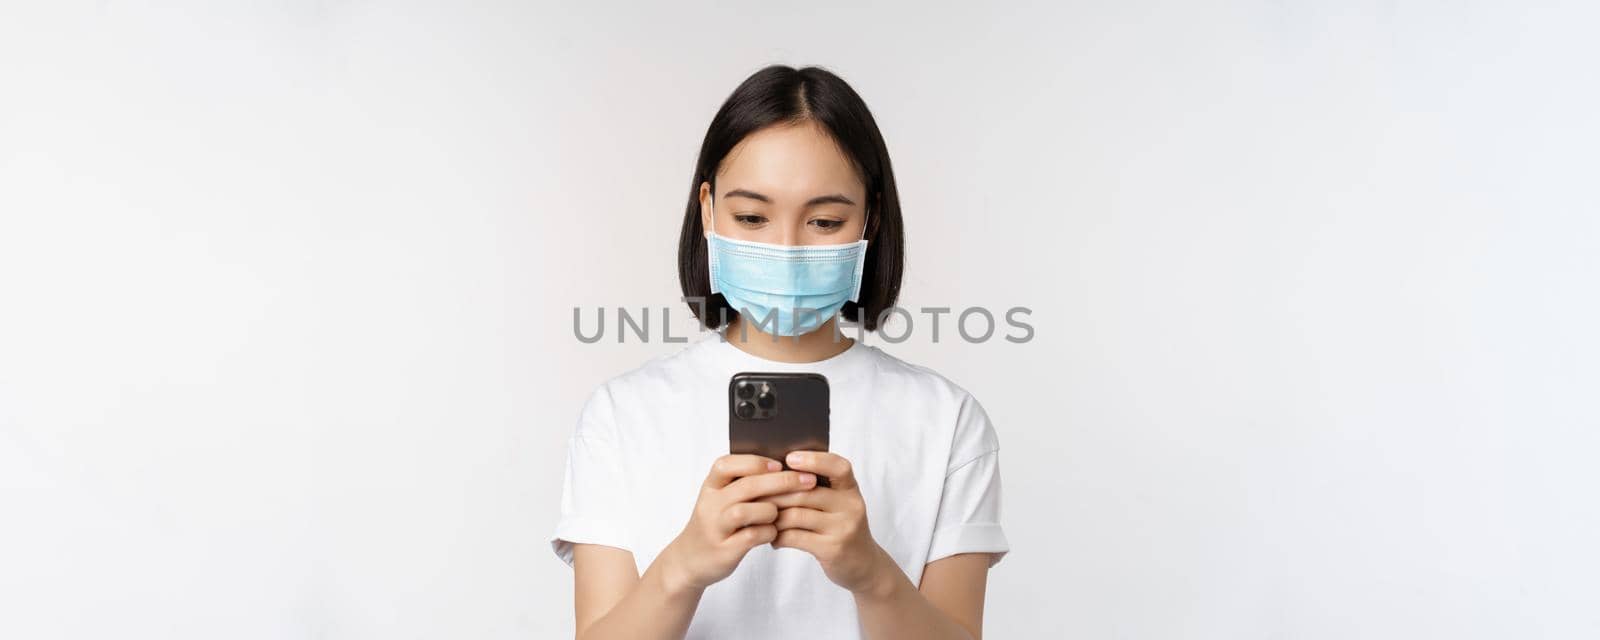 Health, covid and mobile concept. Young asian woman in medical face mask, looking at smartphone screen, using phone app, shopping online, white background.